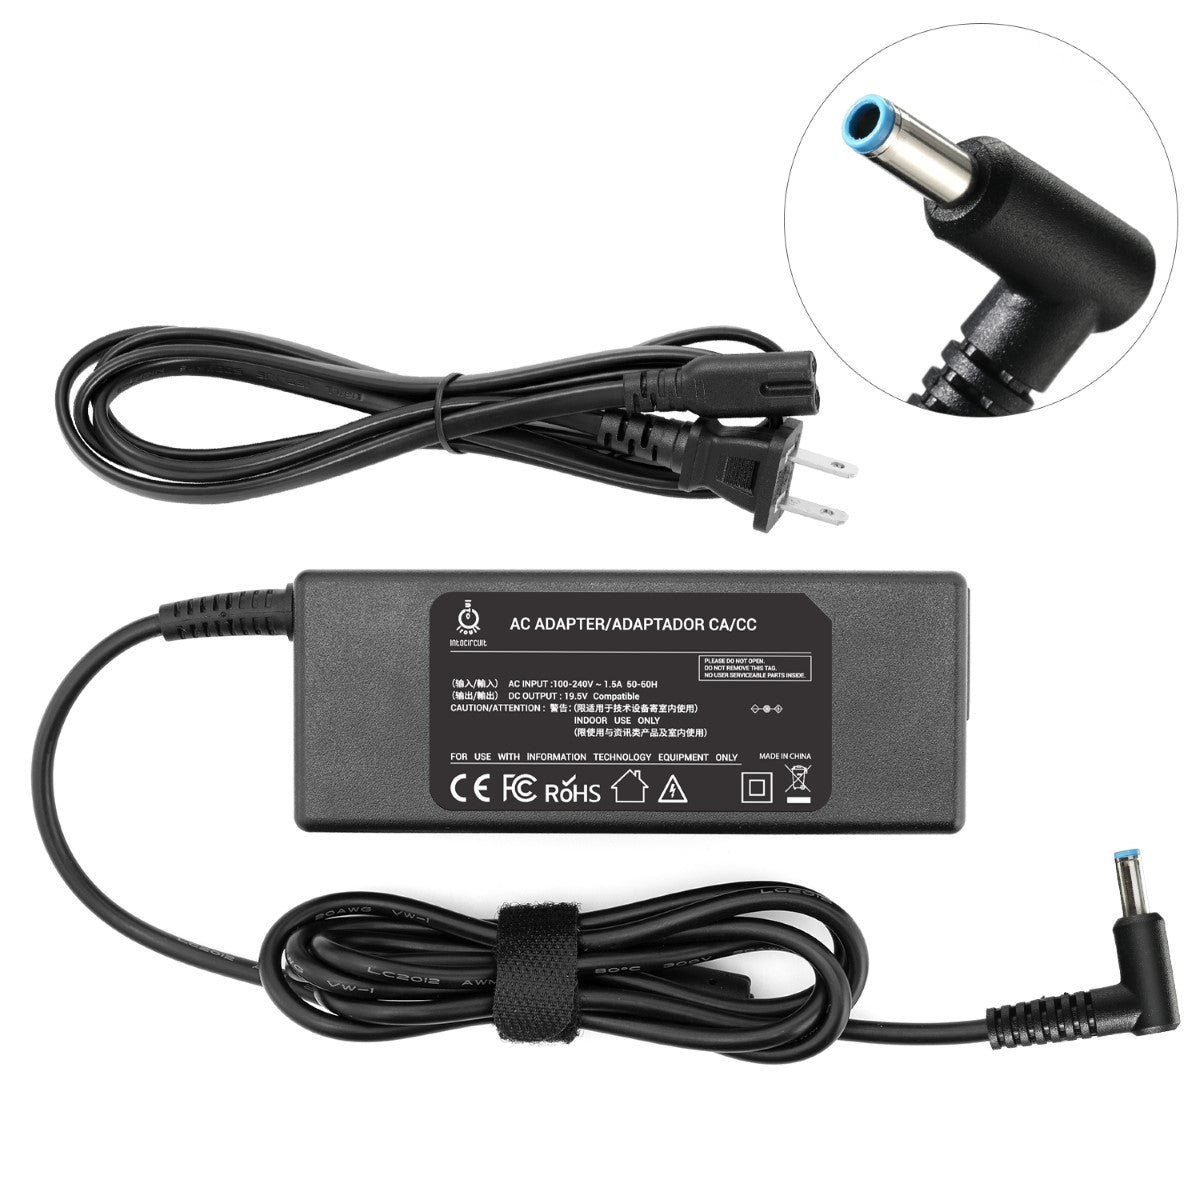 Charger for HP ENVY 15t-w100 x360 Laptop